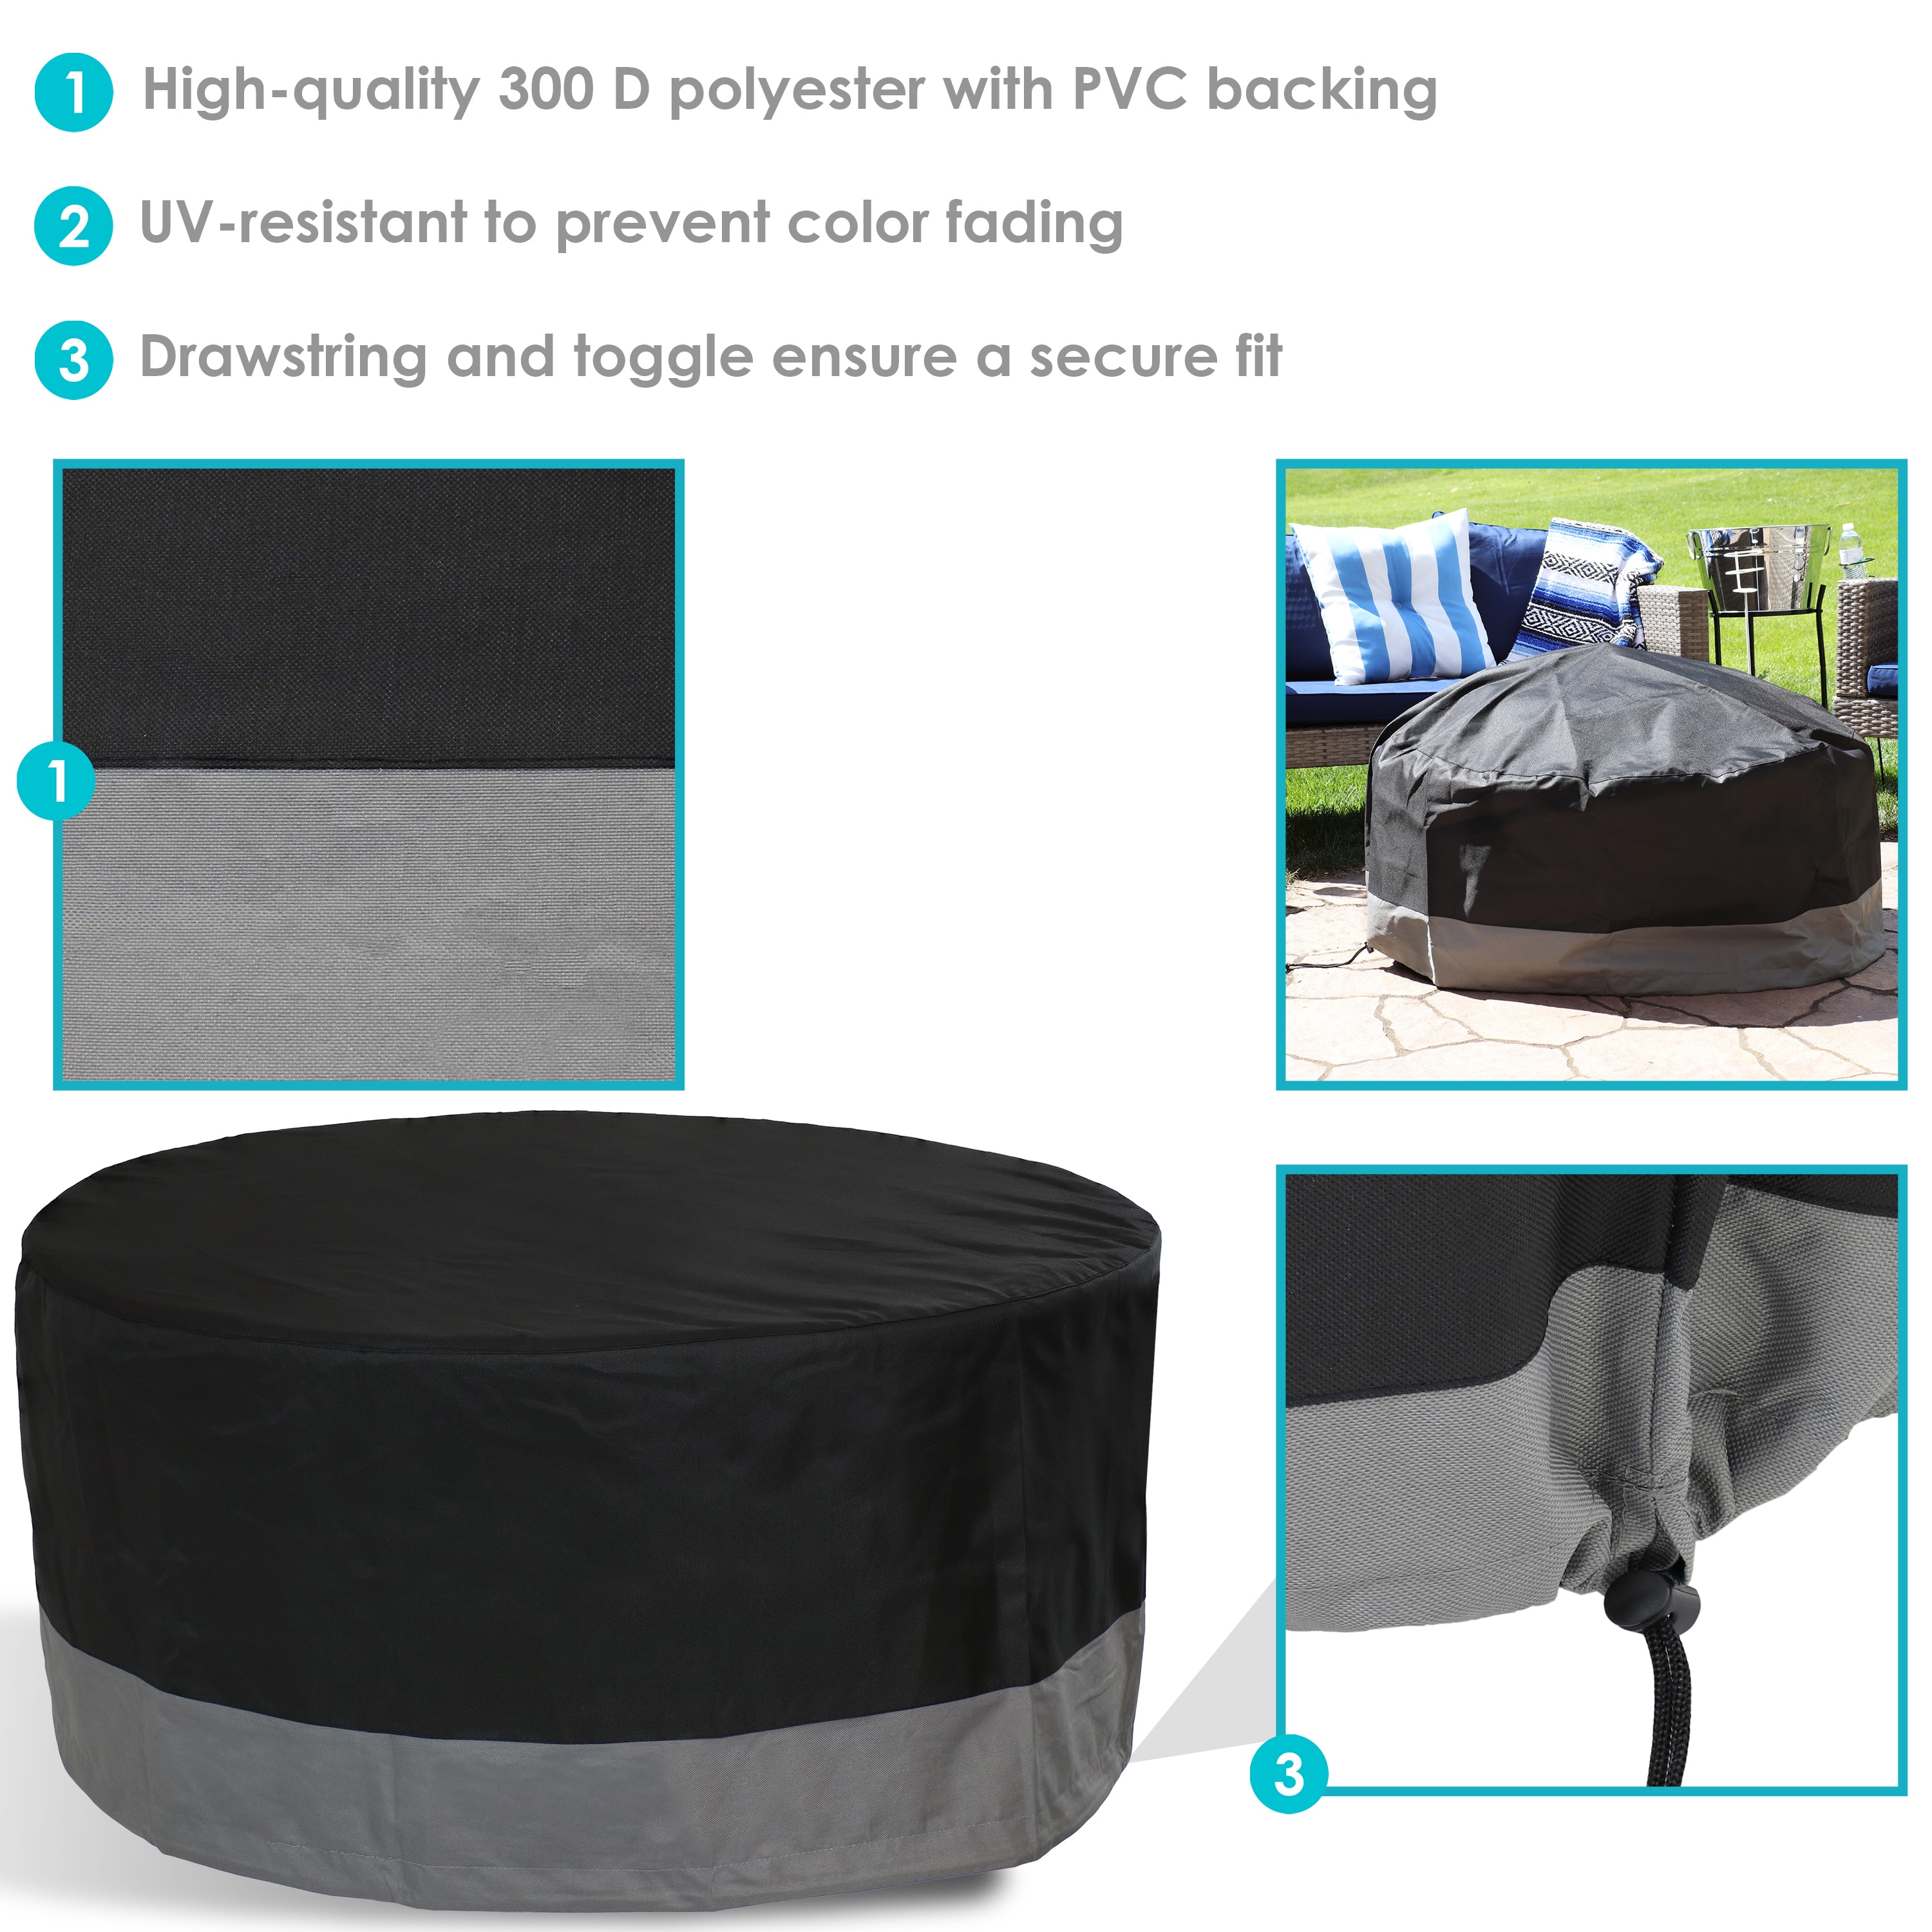 Sunnydaze Black Round Fire Pit Cover Heavy-Duty 300D Polyester 30-Inch